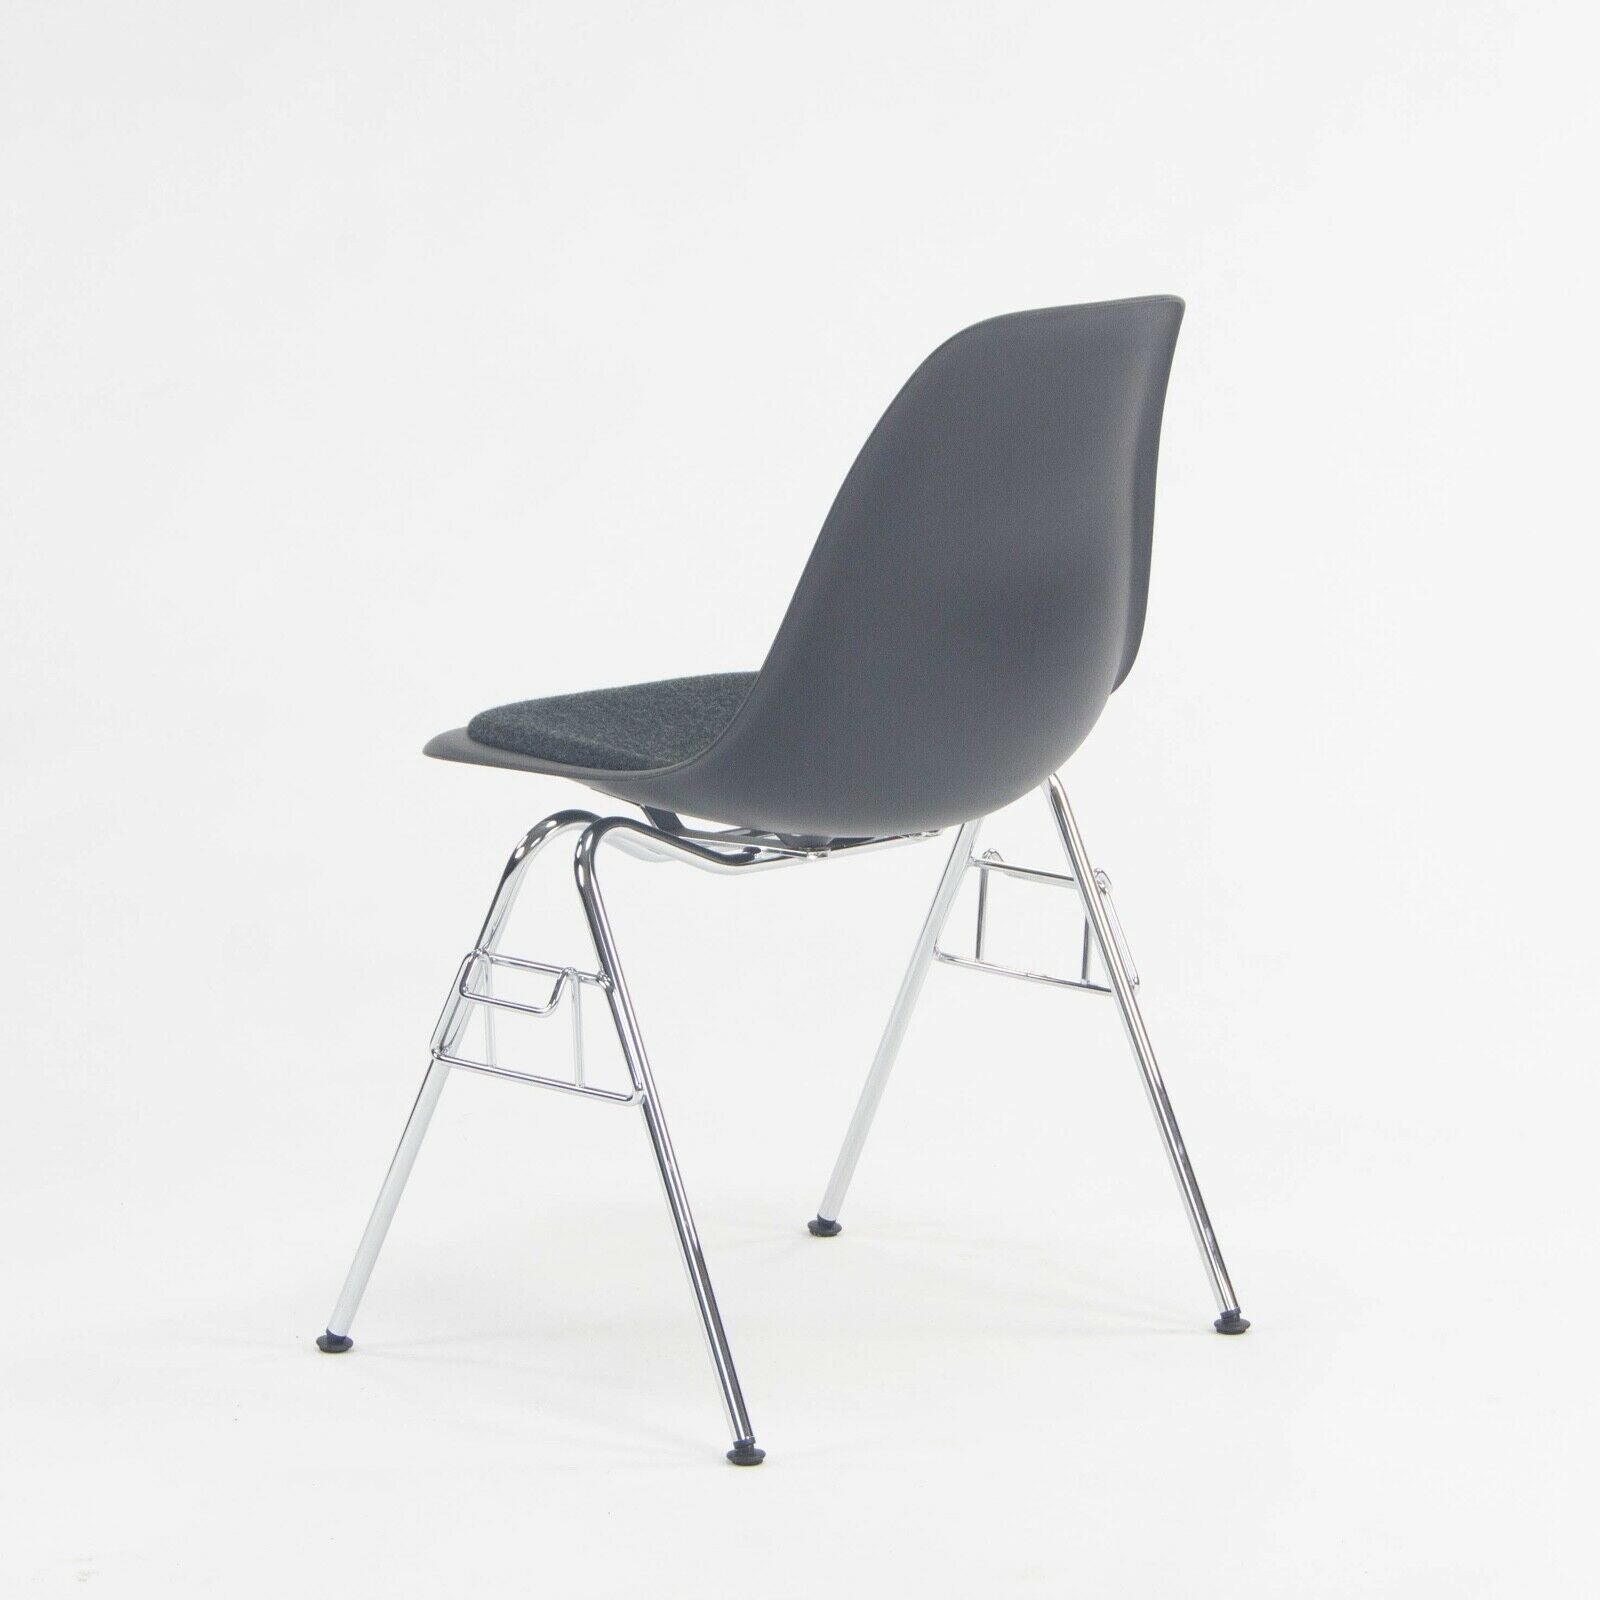 SOLD 2018 Eames Stacking Dining Chair DSS w Gray Fabric Seat by Vitra / Herman Miller